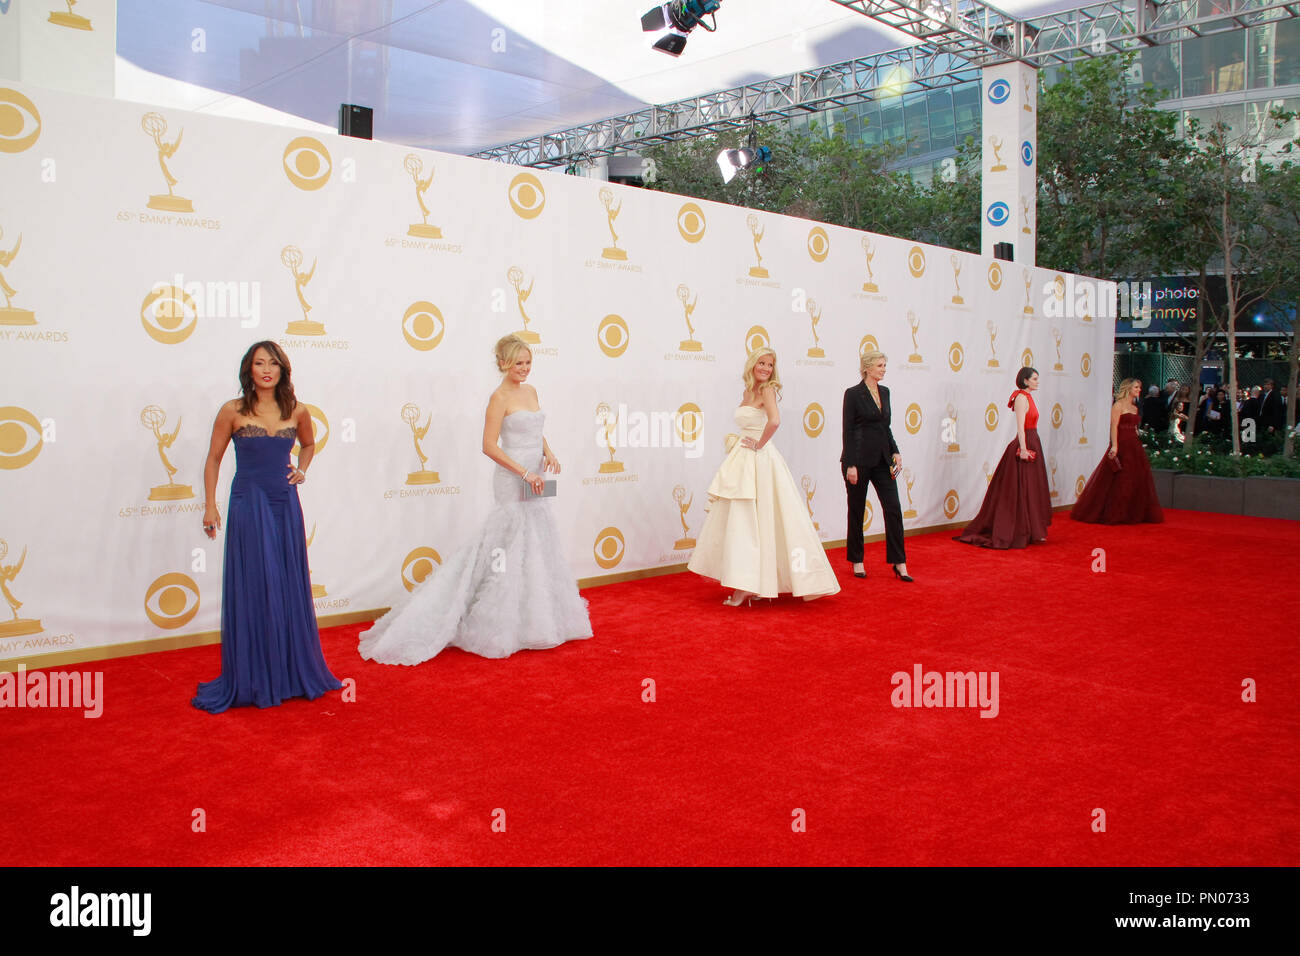 Carrie Ann Inaba, Malin Akerman and others at the 65th Primetime Emmy Awards held at the Nokia Theatre L.A. Live  in Los Angeles, CA, on September 22, 2013. Photo by Joe Martinez / PictureLux Stock Photo